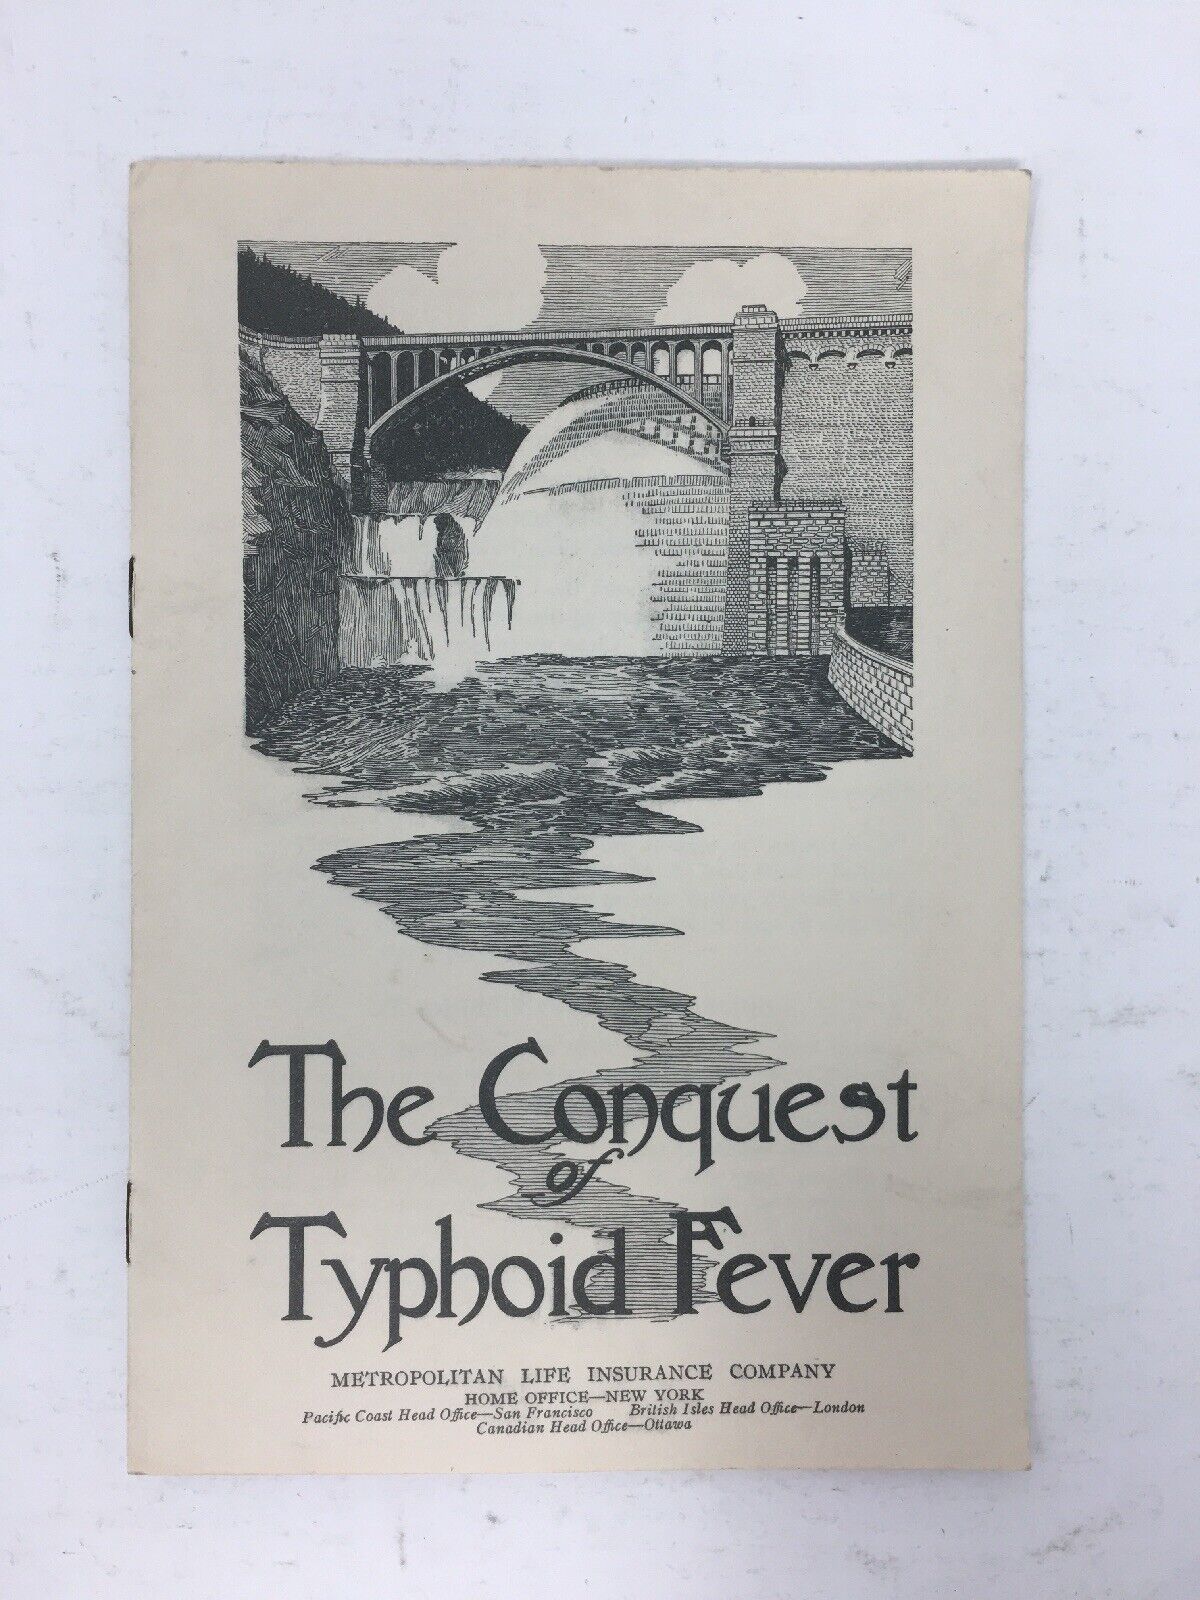 The Conquest of Typhoid Fever Metropolitan Life Insurance Information Booklet